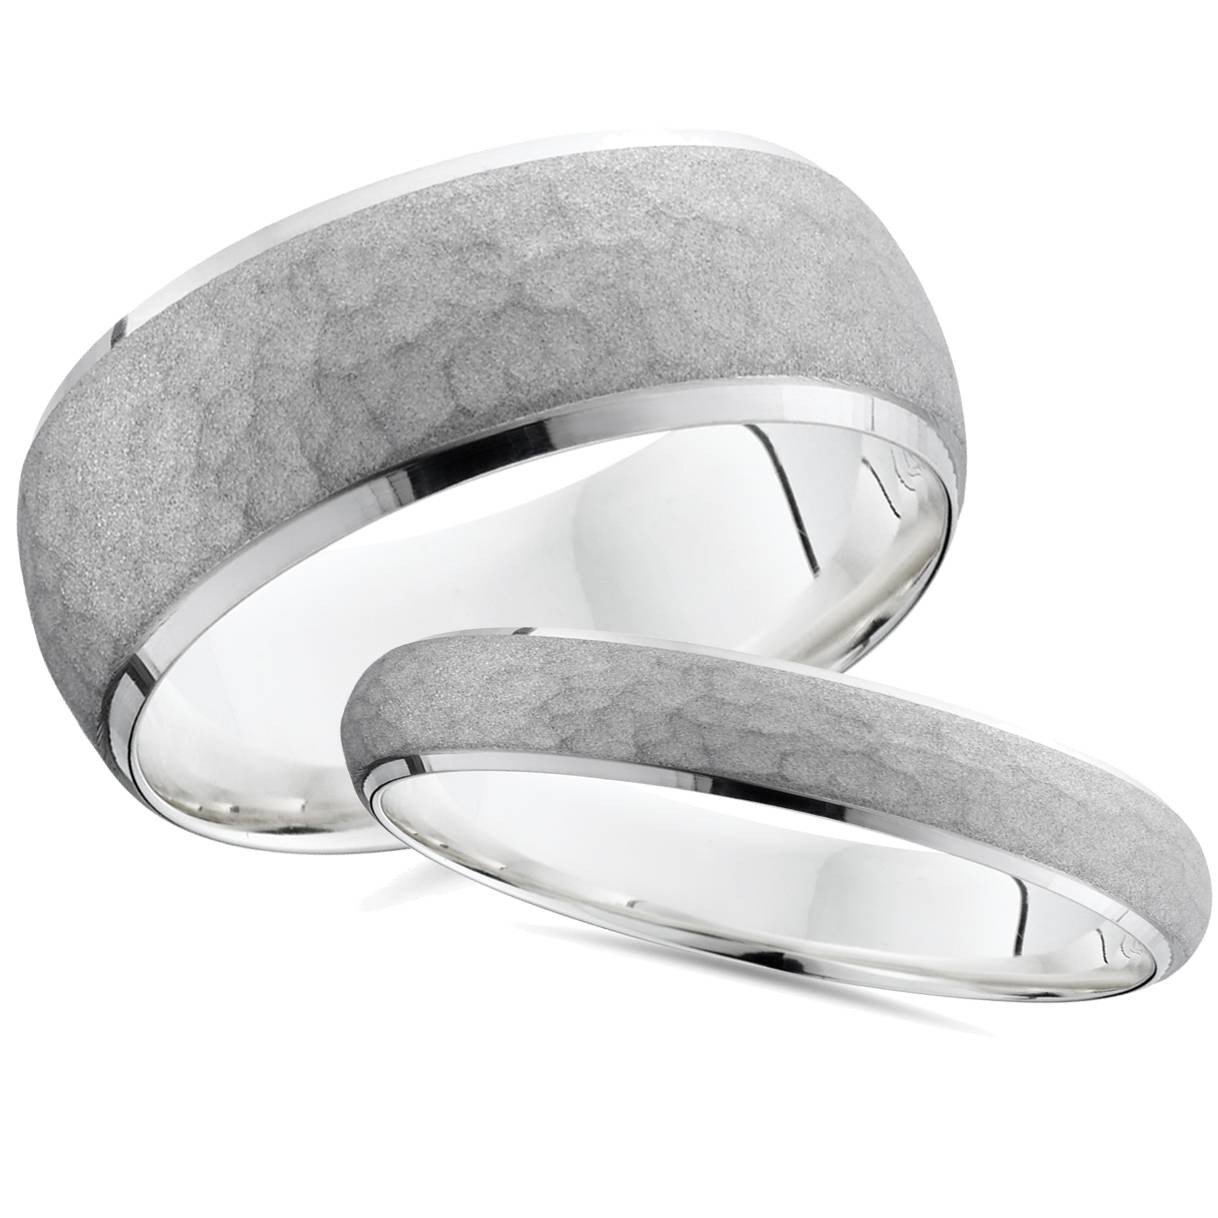 White Gold Wedding Ring Sets His And Hers
 Matching Hammered White Gold His Hers Wedding Band Set